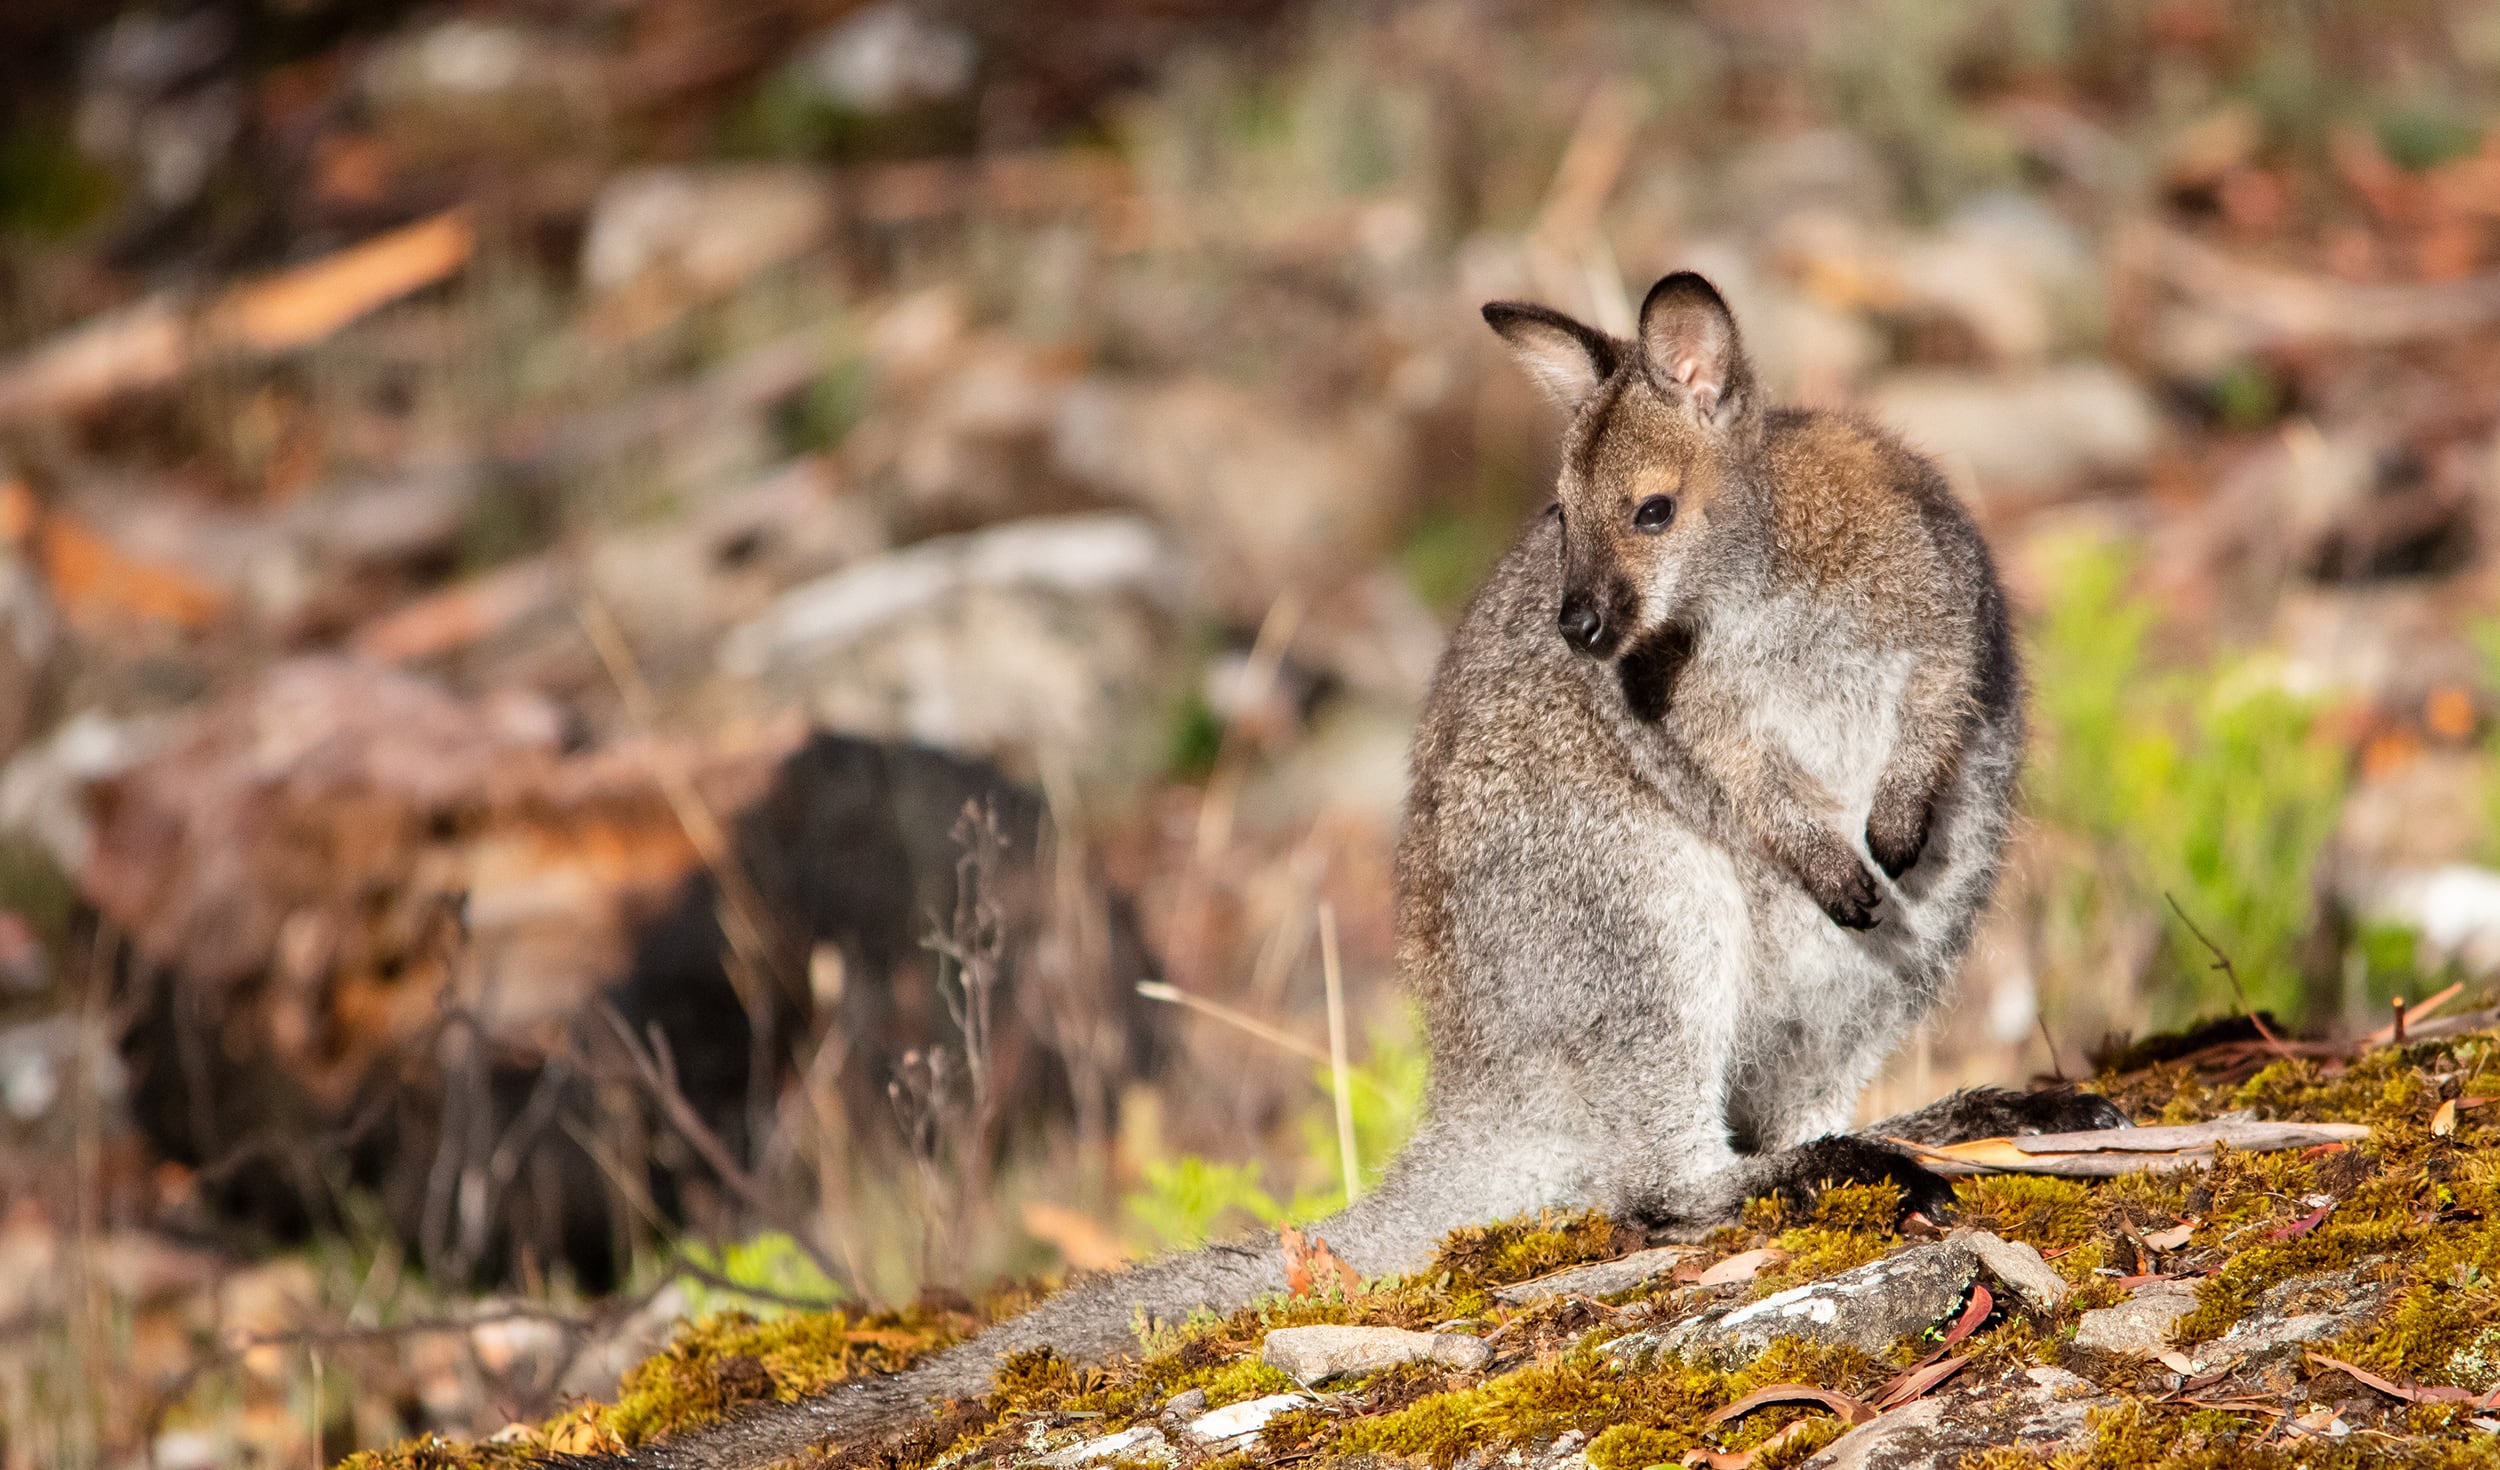 Wallabies are on the loose in Britain